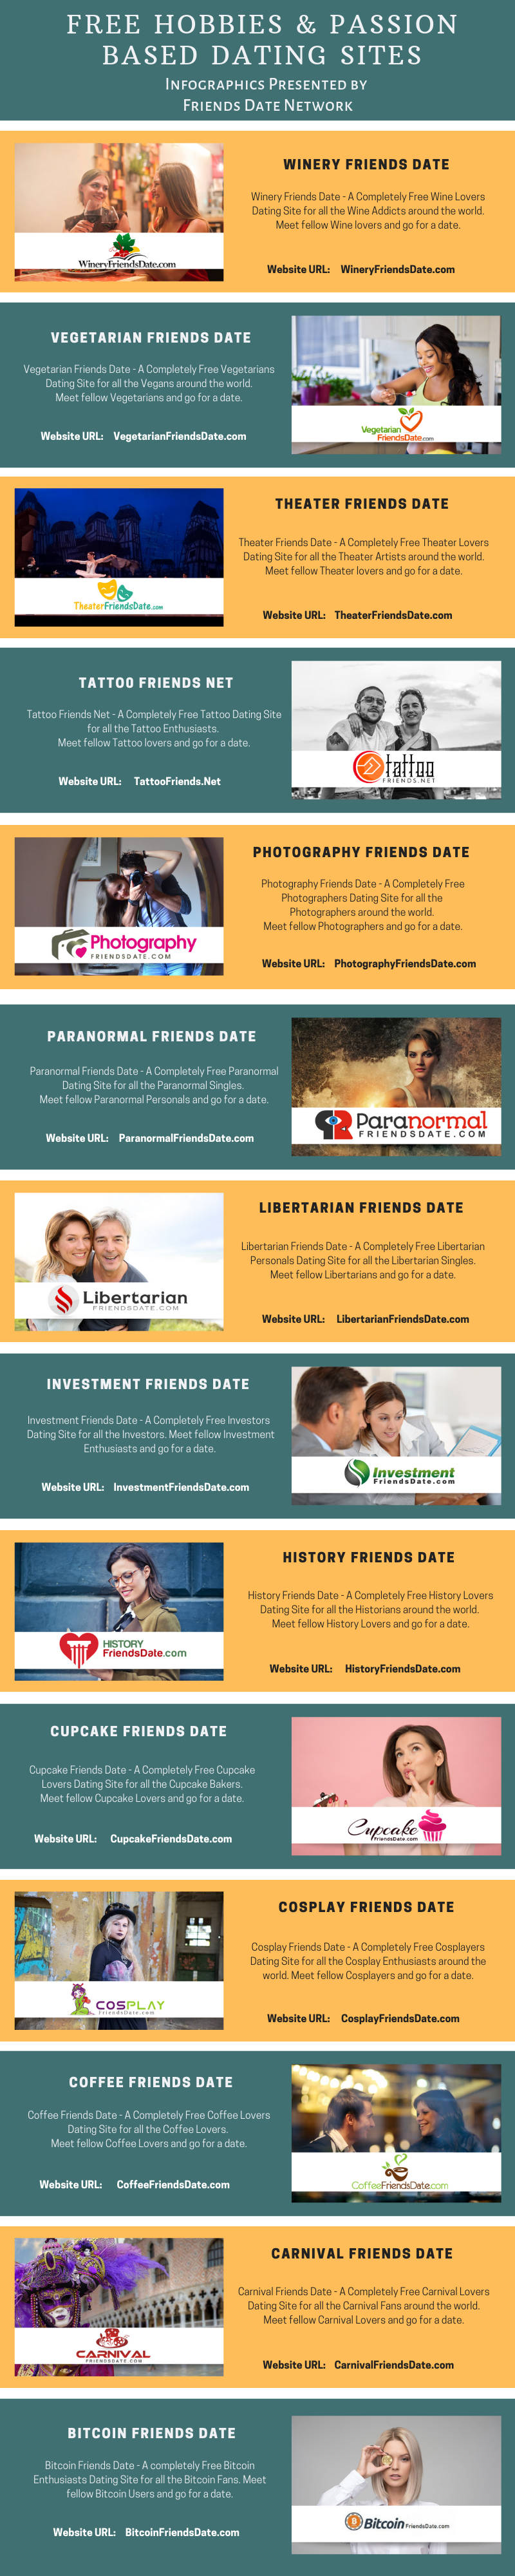 Free Passion Based Dating Sites [Infographics] - Friends Date Network